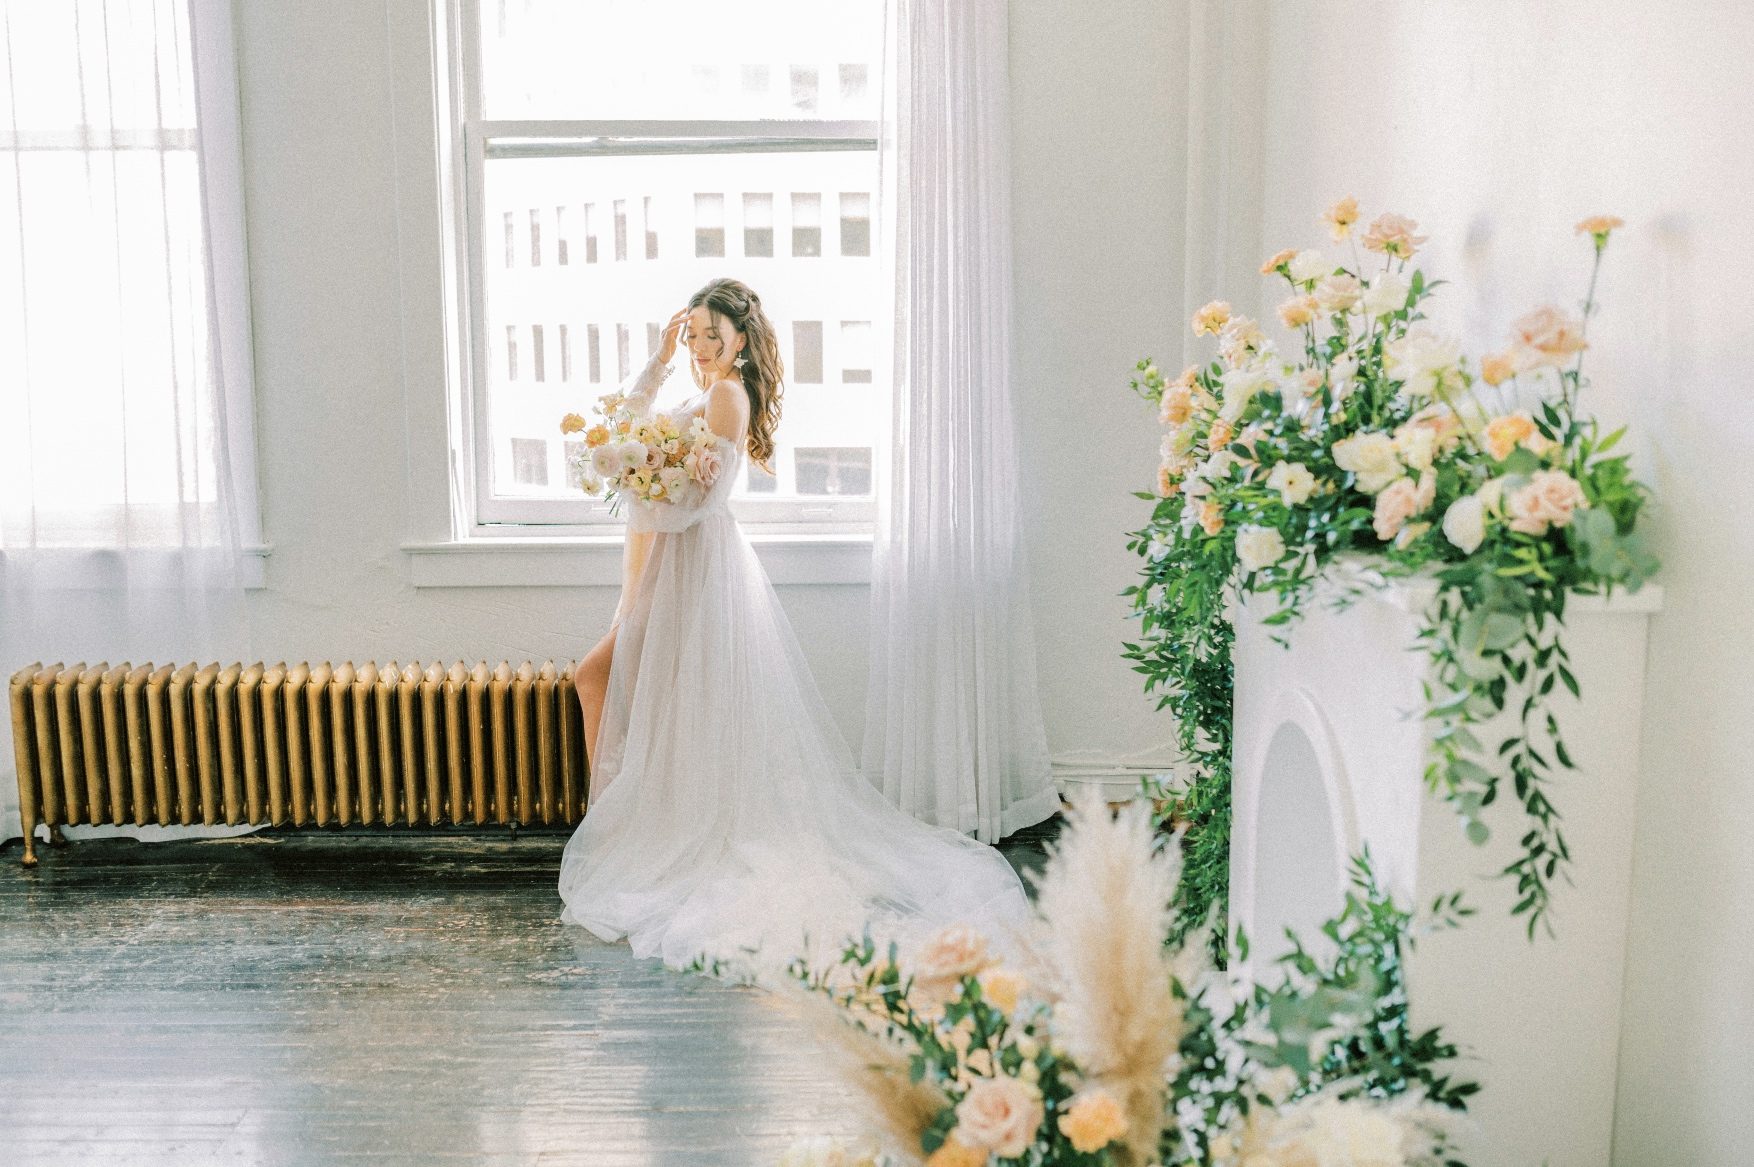 A Calyx Floral Design model stands in front of a window streaming with natural light. Her beautiful gown pools around her feet and she holds a peach and blush bouquet